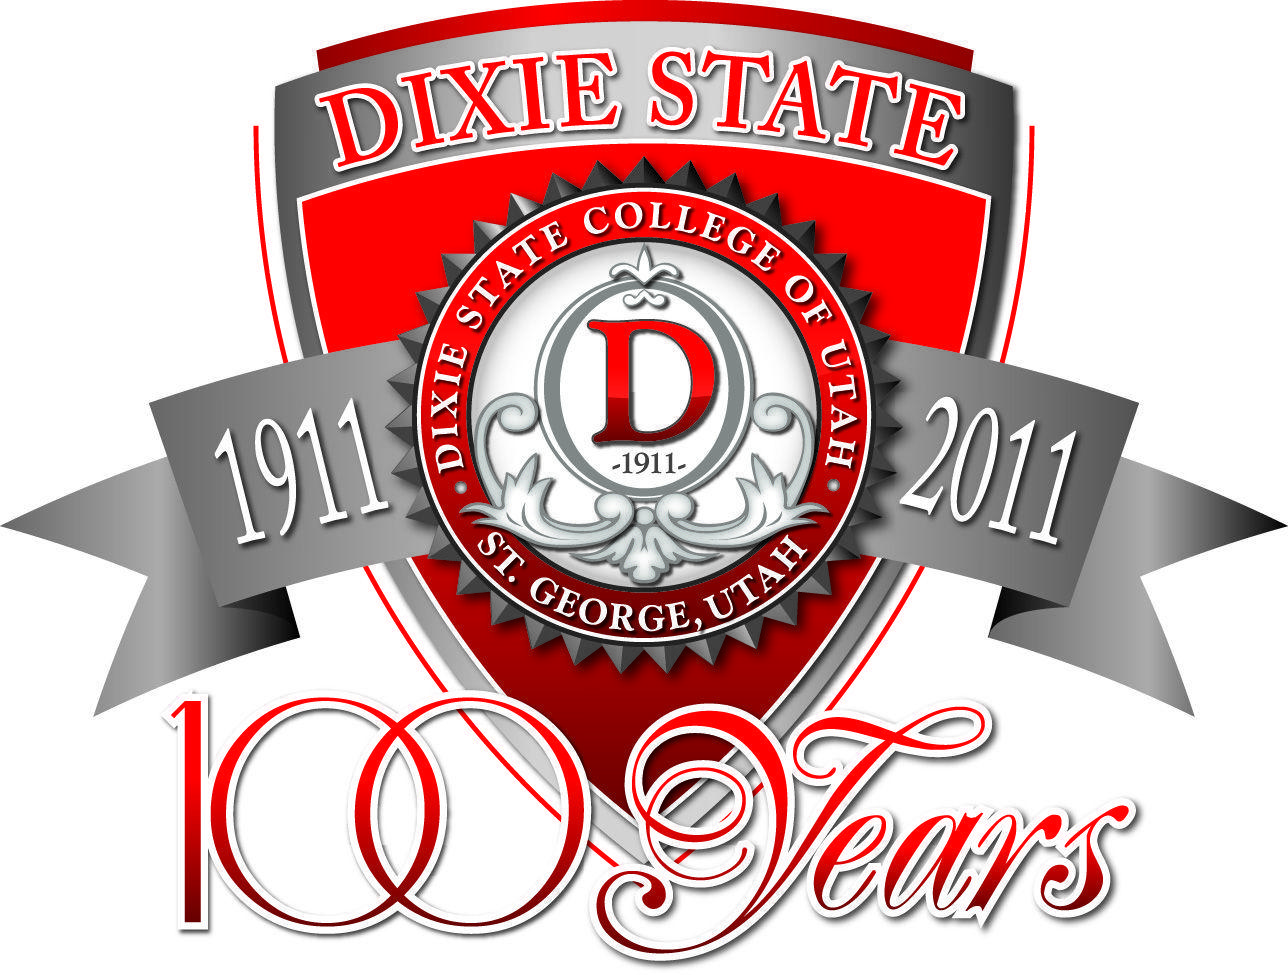 Dixie State Logo - Dixie State College - 100 Years Logo - I graduated in 2013 7 Blocks ...